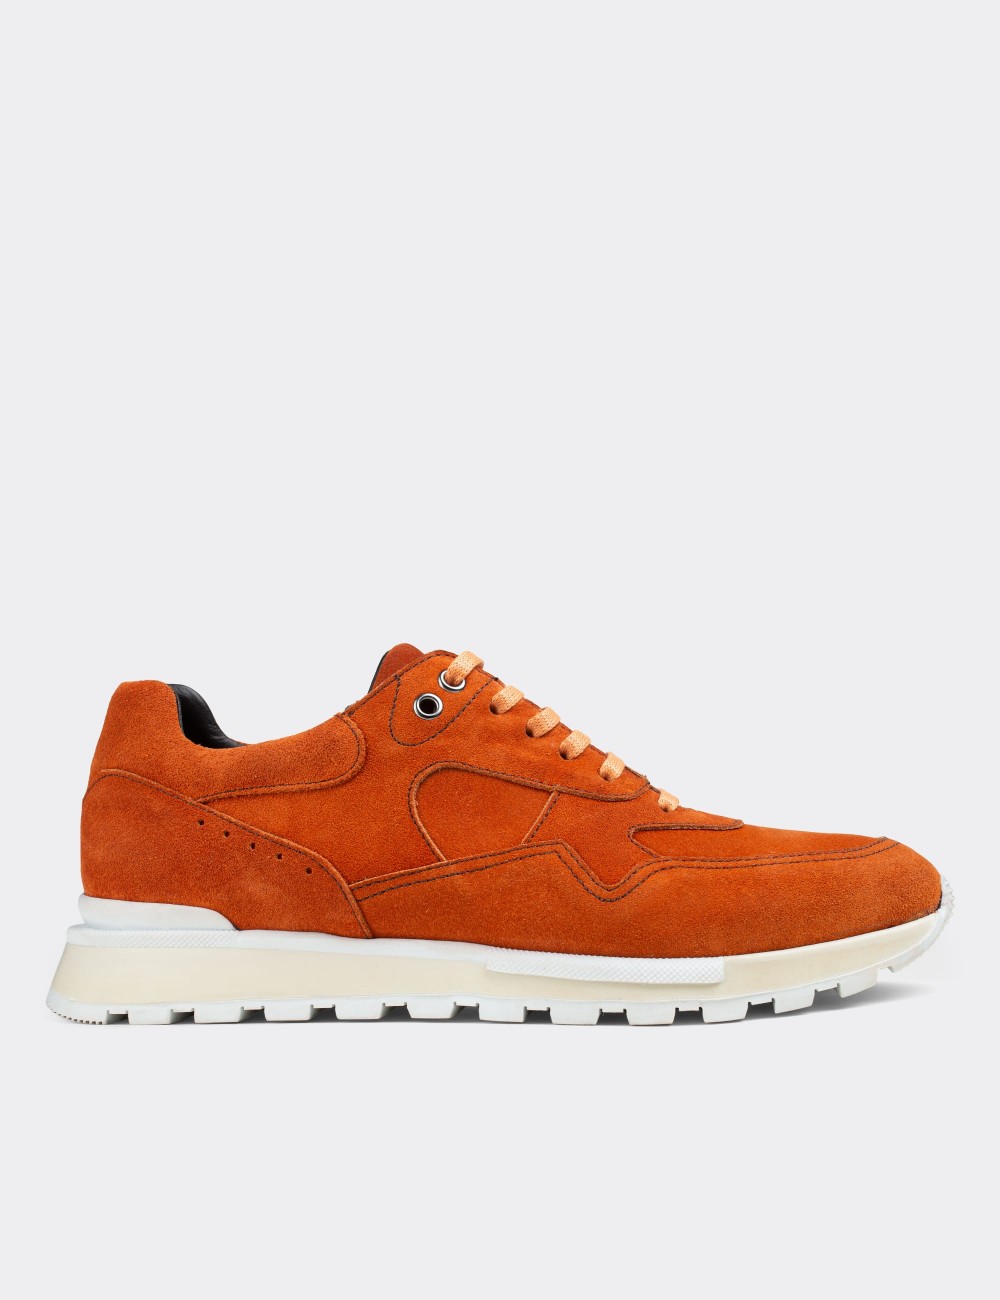 Orange Suede Leather Sneakers - 01818MTRCT01